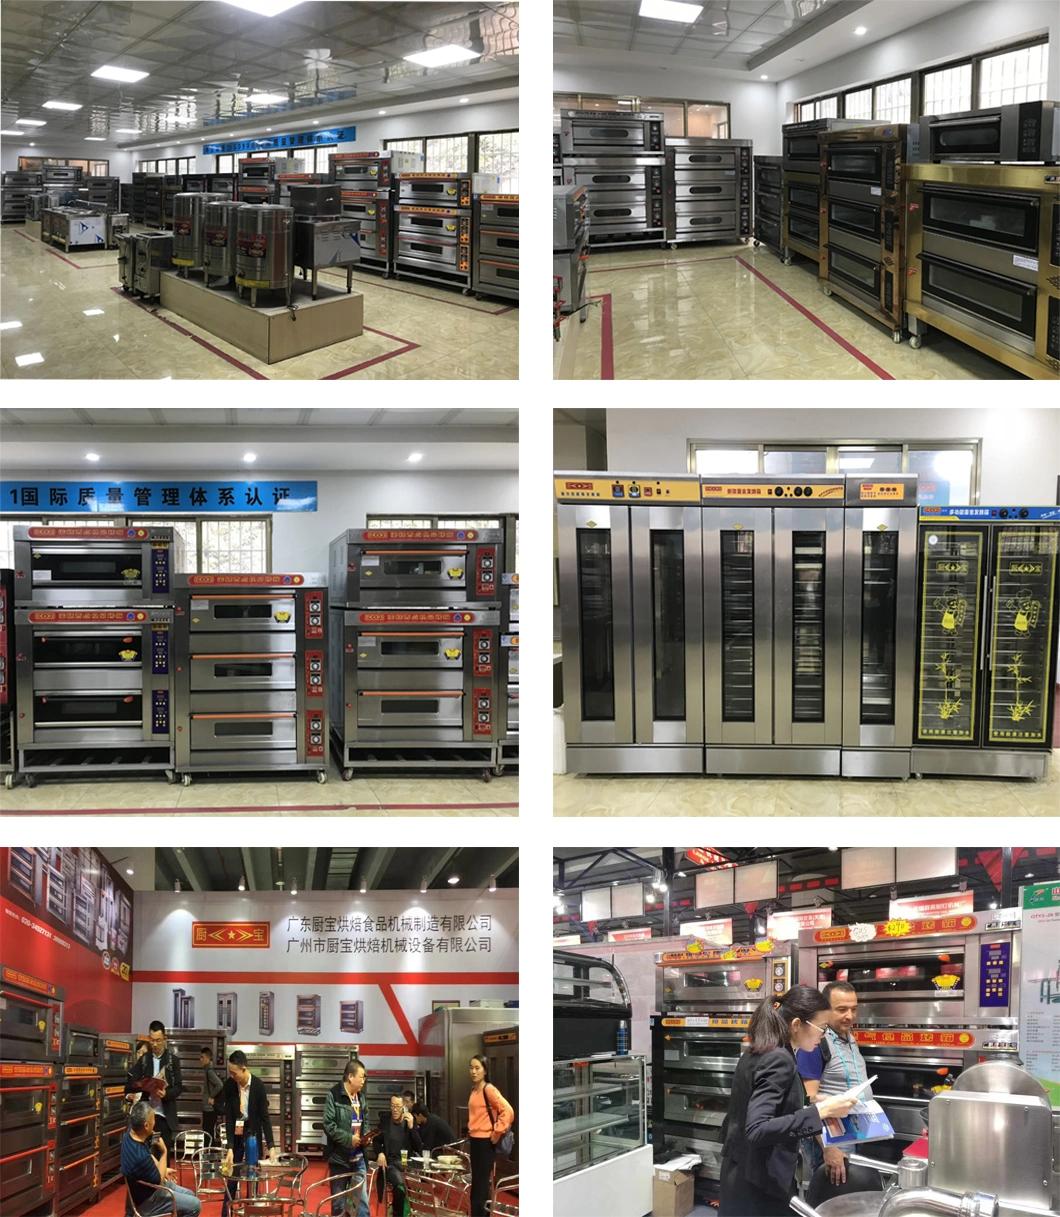 3 Deck 6 Tray Luxury Gas Oven for Commercial Restaurant Kitchen Baking Machinery Bakery Machine Food Equipment